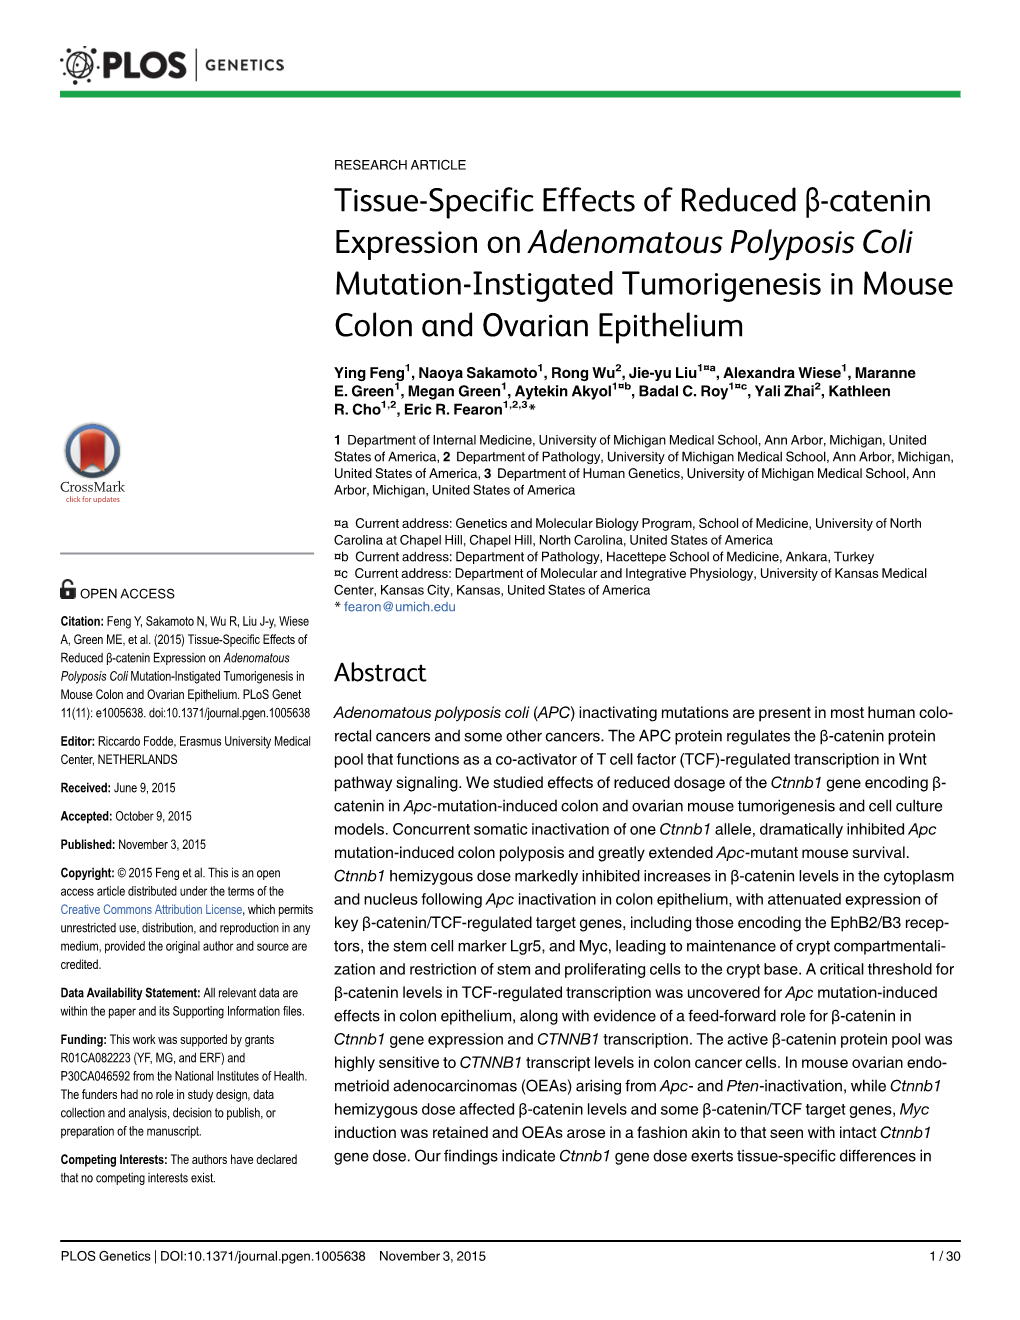 Tissue-Specific Effects of Reduced Β-Catenin Expression on Adenomatous Polyposis Coli Mutation-Instigated Tumorigenesis in Mouse Colon and Ovarian Epithelium